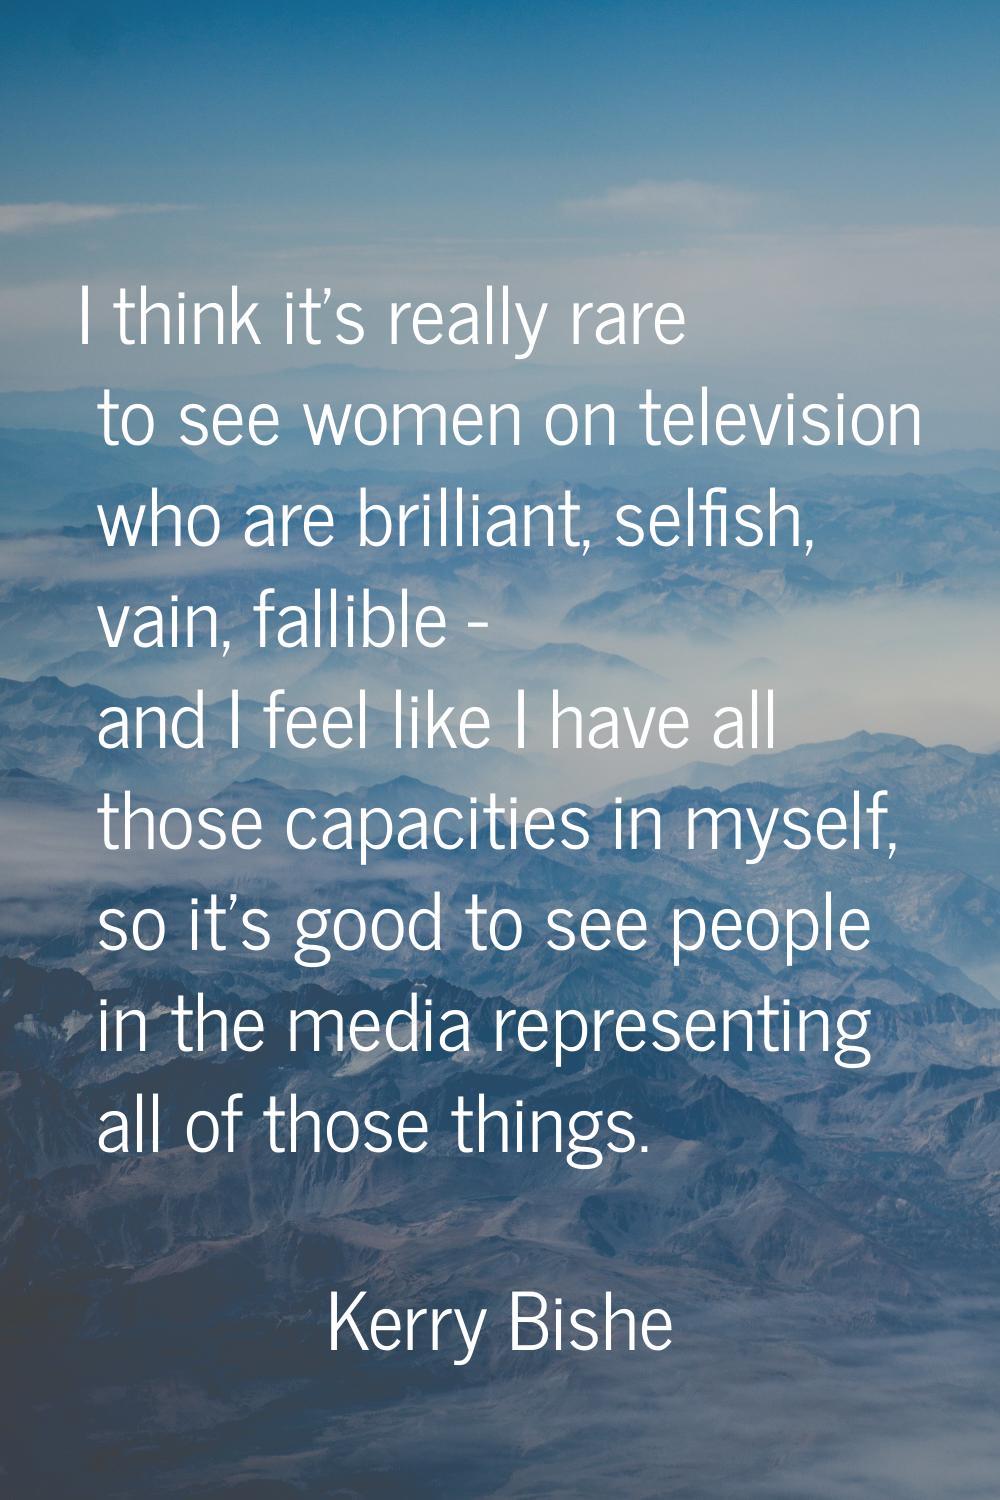 I think it's really rare to see women on television who are brilliant, selfish, vain, fallible - an